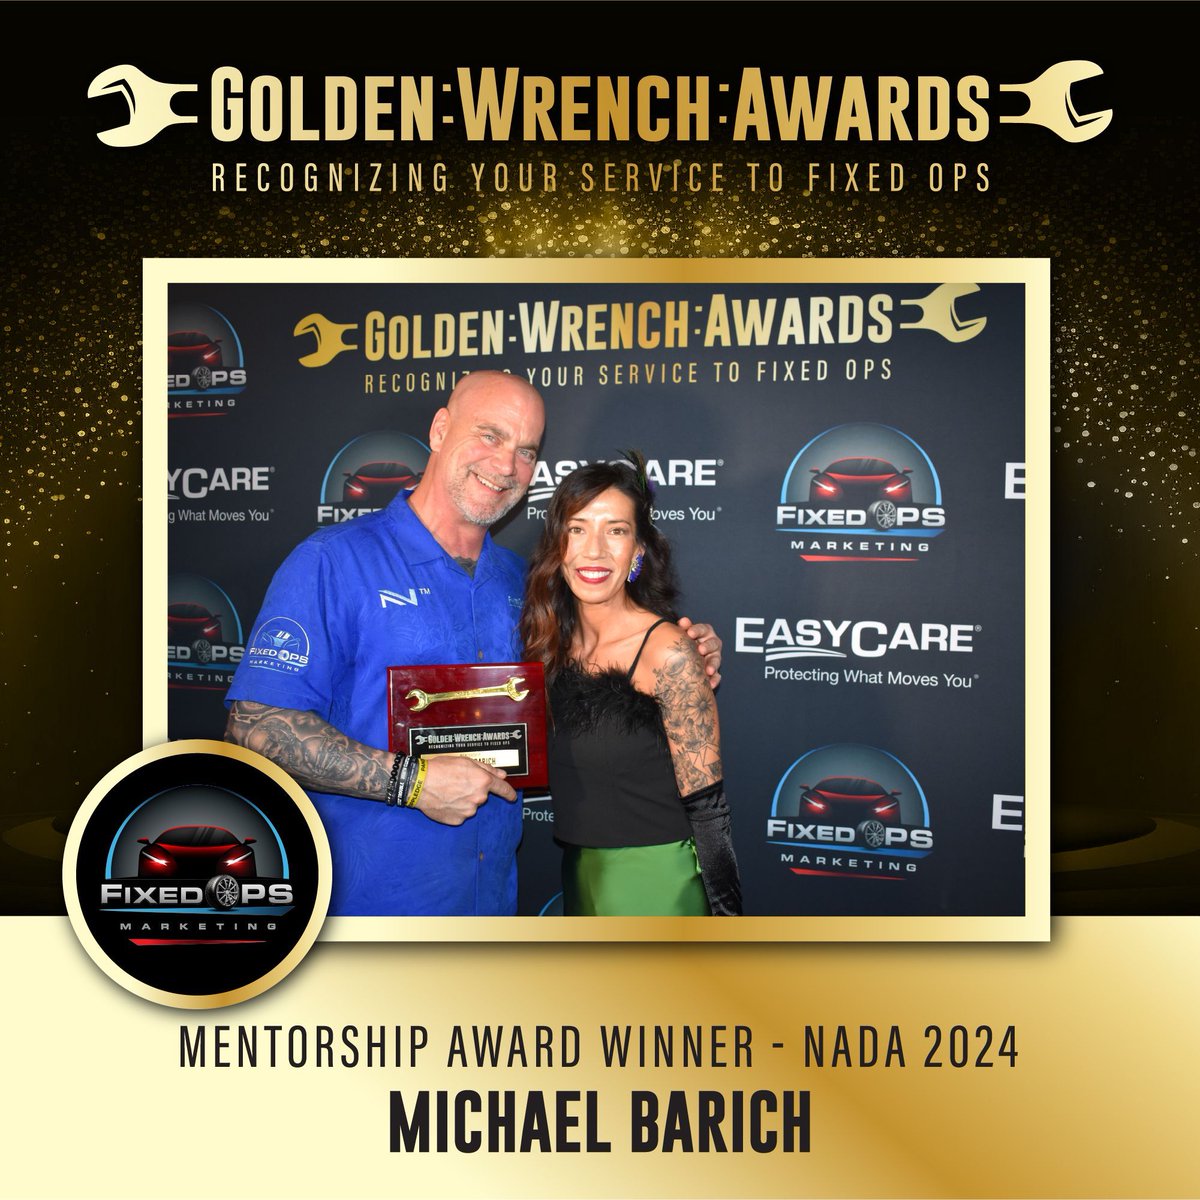 We want to recognize Michael Barich for his mentorship and commitment to automotive. Automotive wouldn't be the same without you, Mike.

#goldenwrenchawards
#2024

thegoldenwrenchaward.com 

*special shoutout to our very own Leann in this photo!